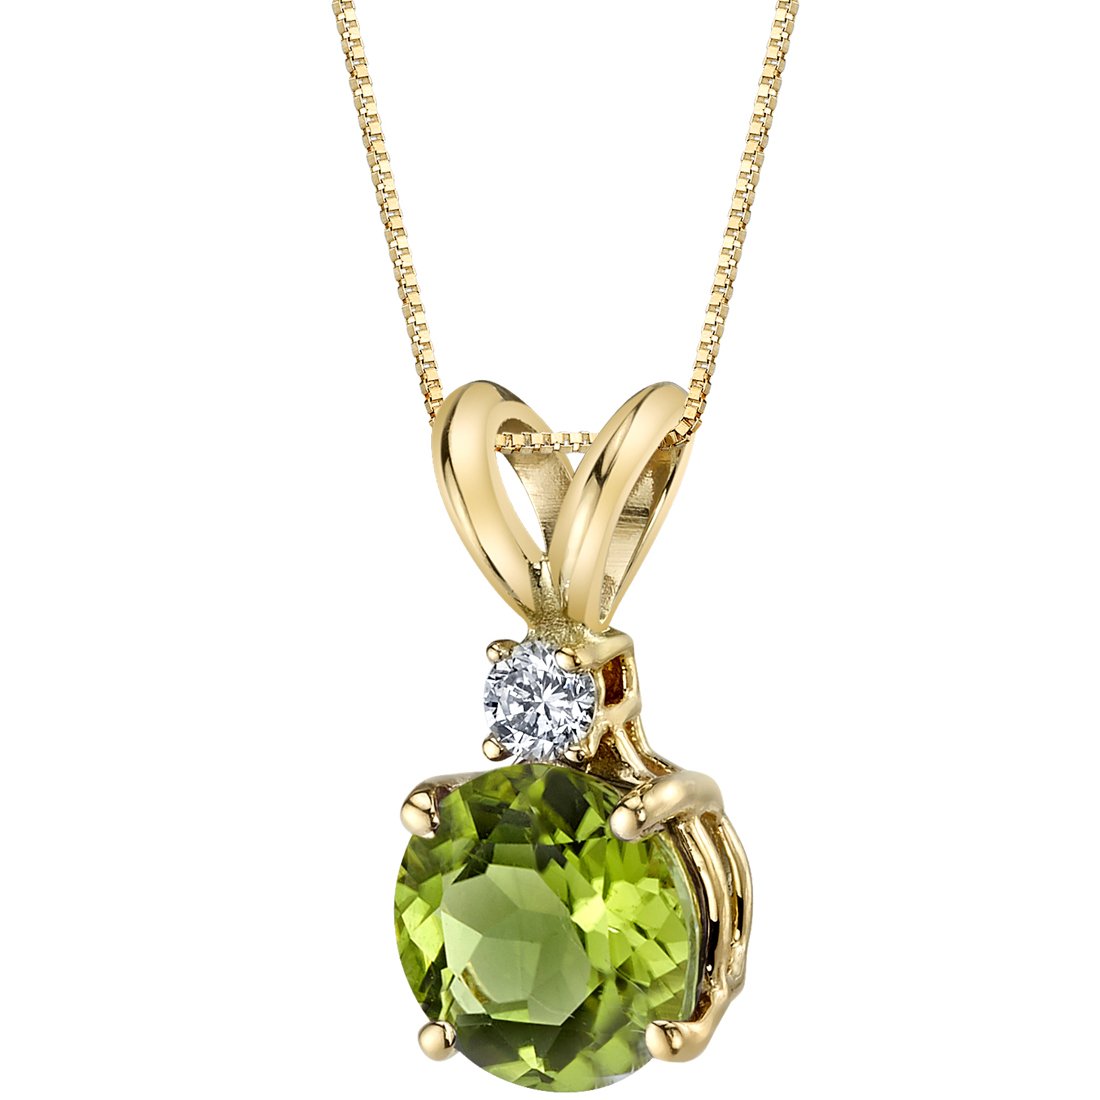 Peora Peridot with Genuine Diamond Pendant in 14K Yellow Gold, Elegant Solitaire, Round Shape, 6.50mm, 1 Carat total